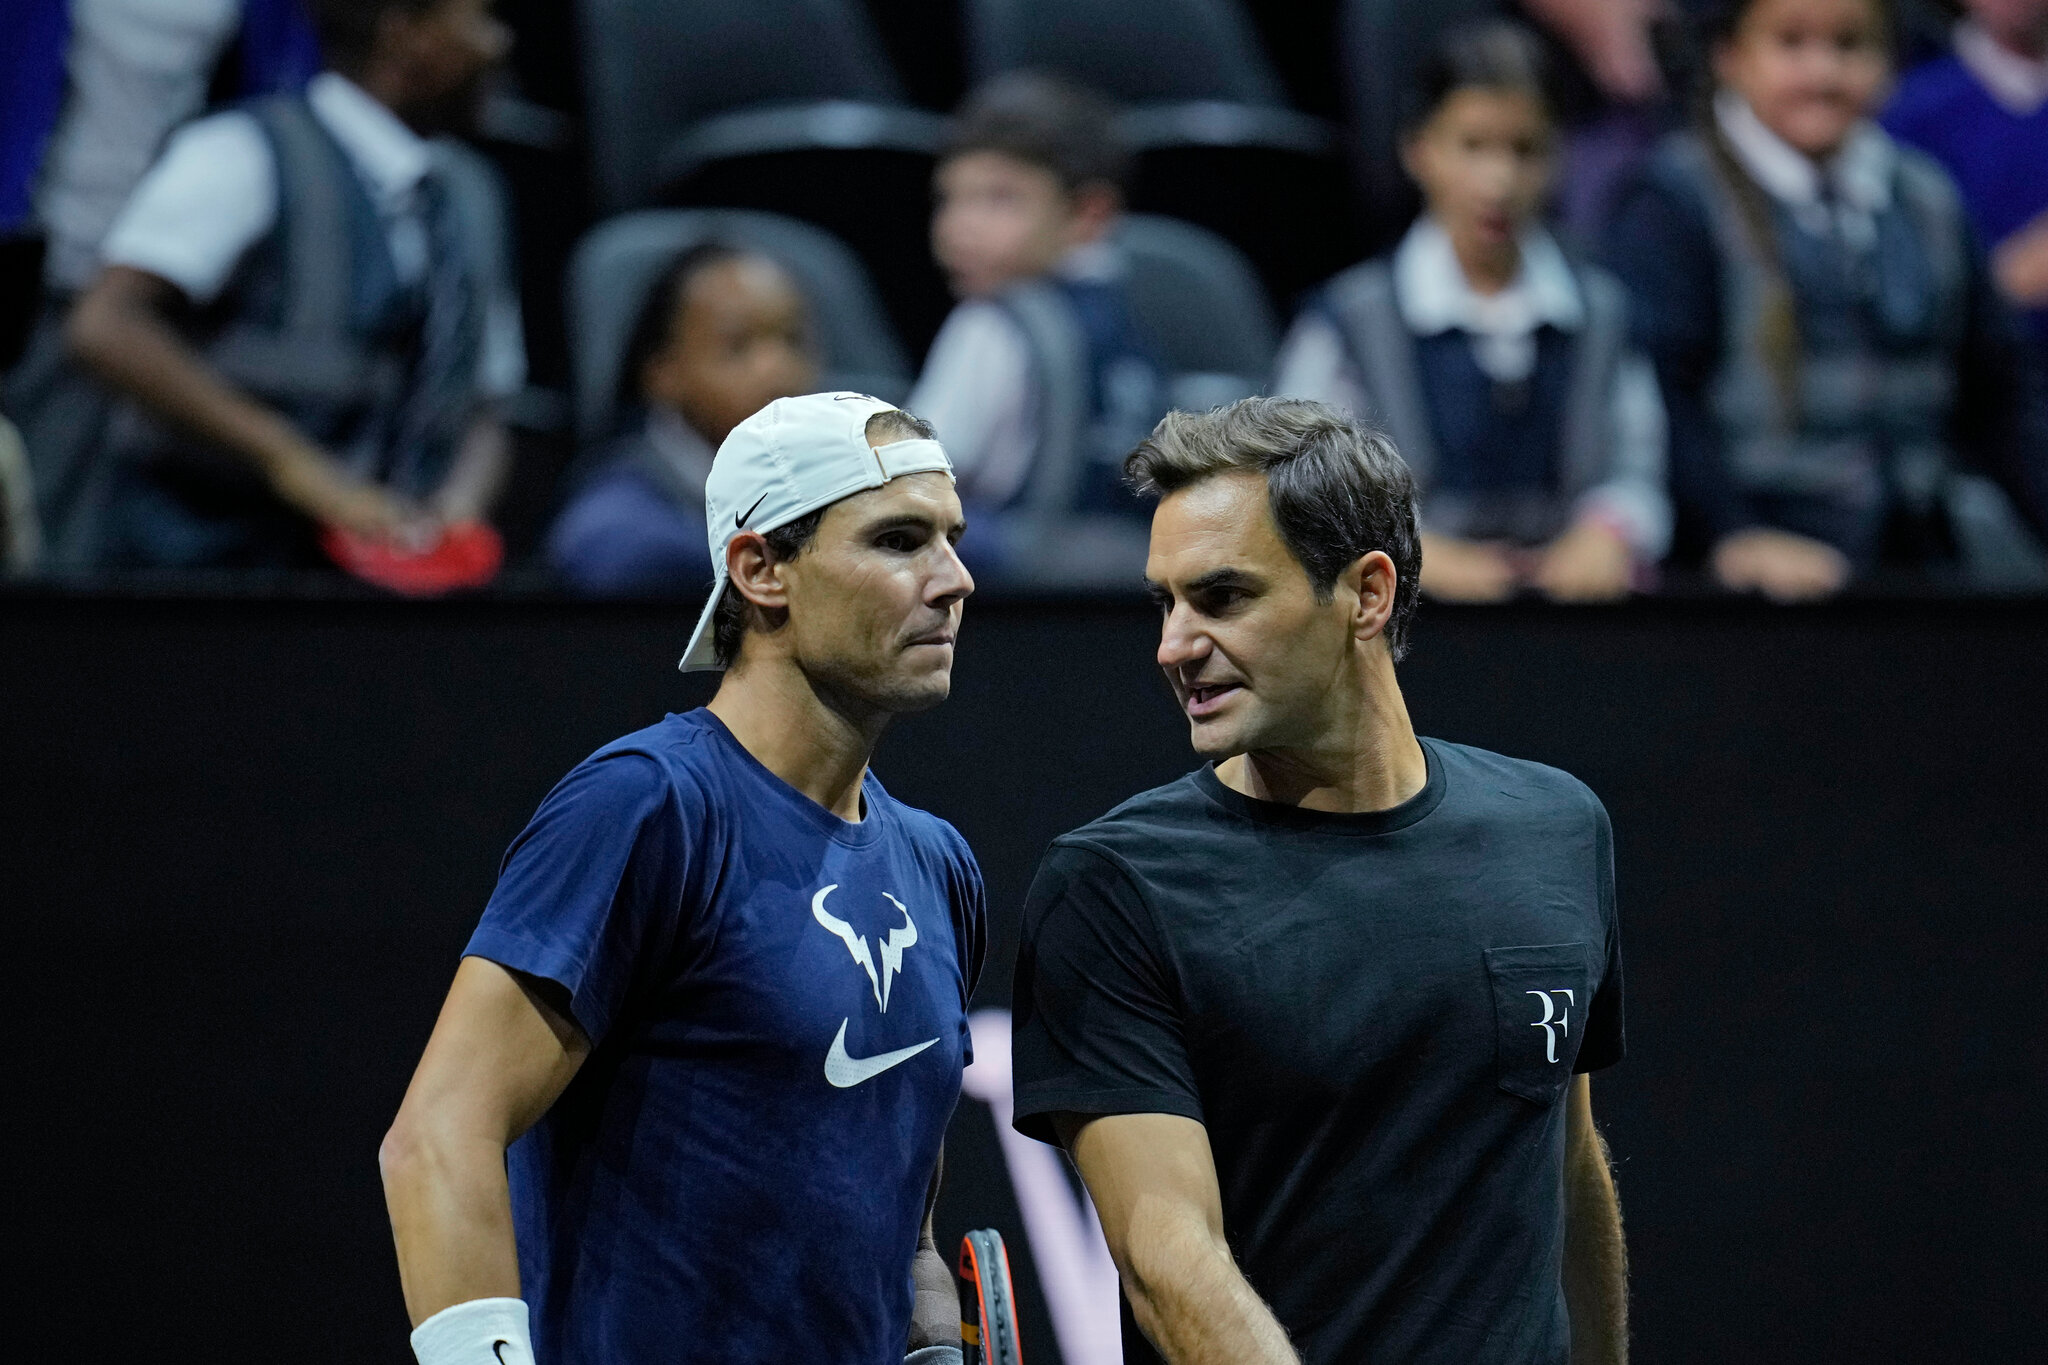 How to Watch Roger Federer's Last Match at Laver Cup